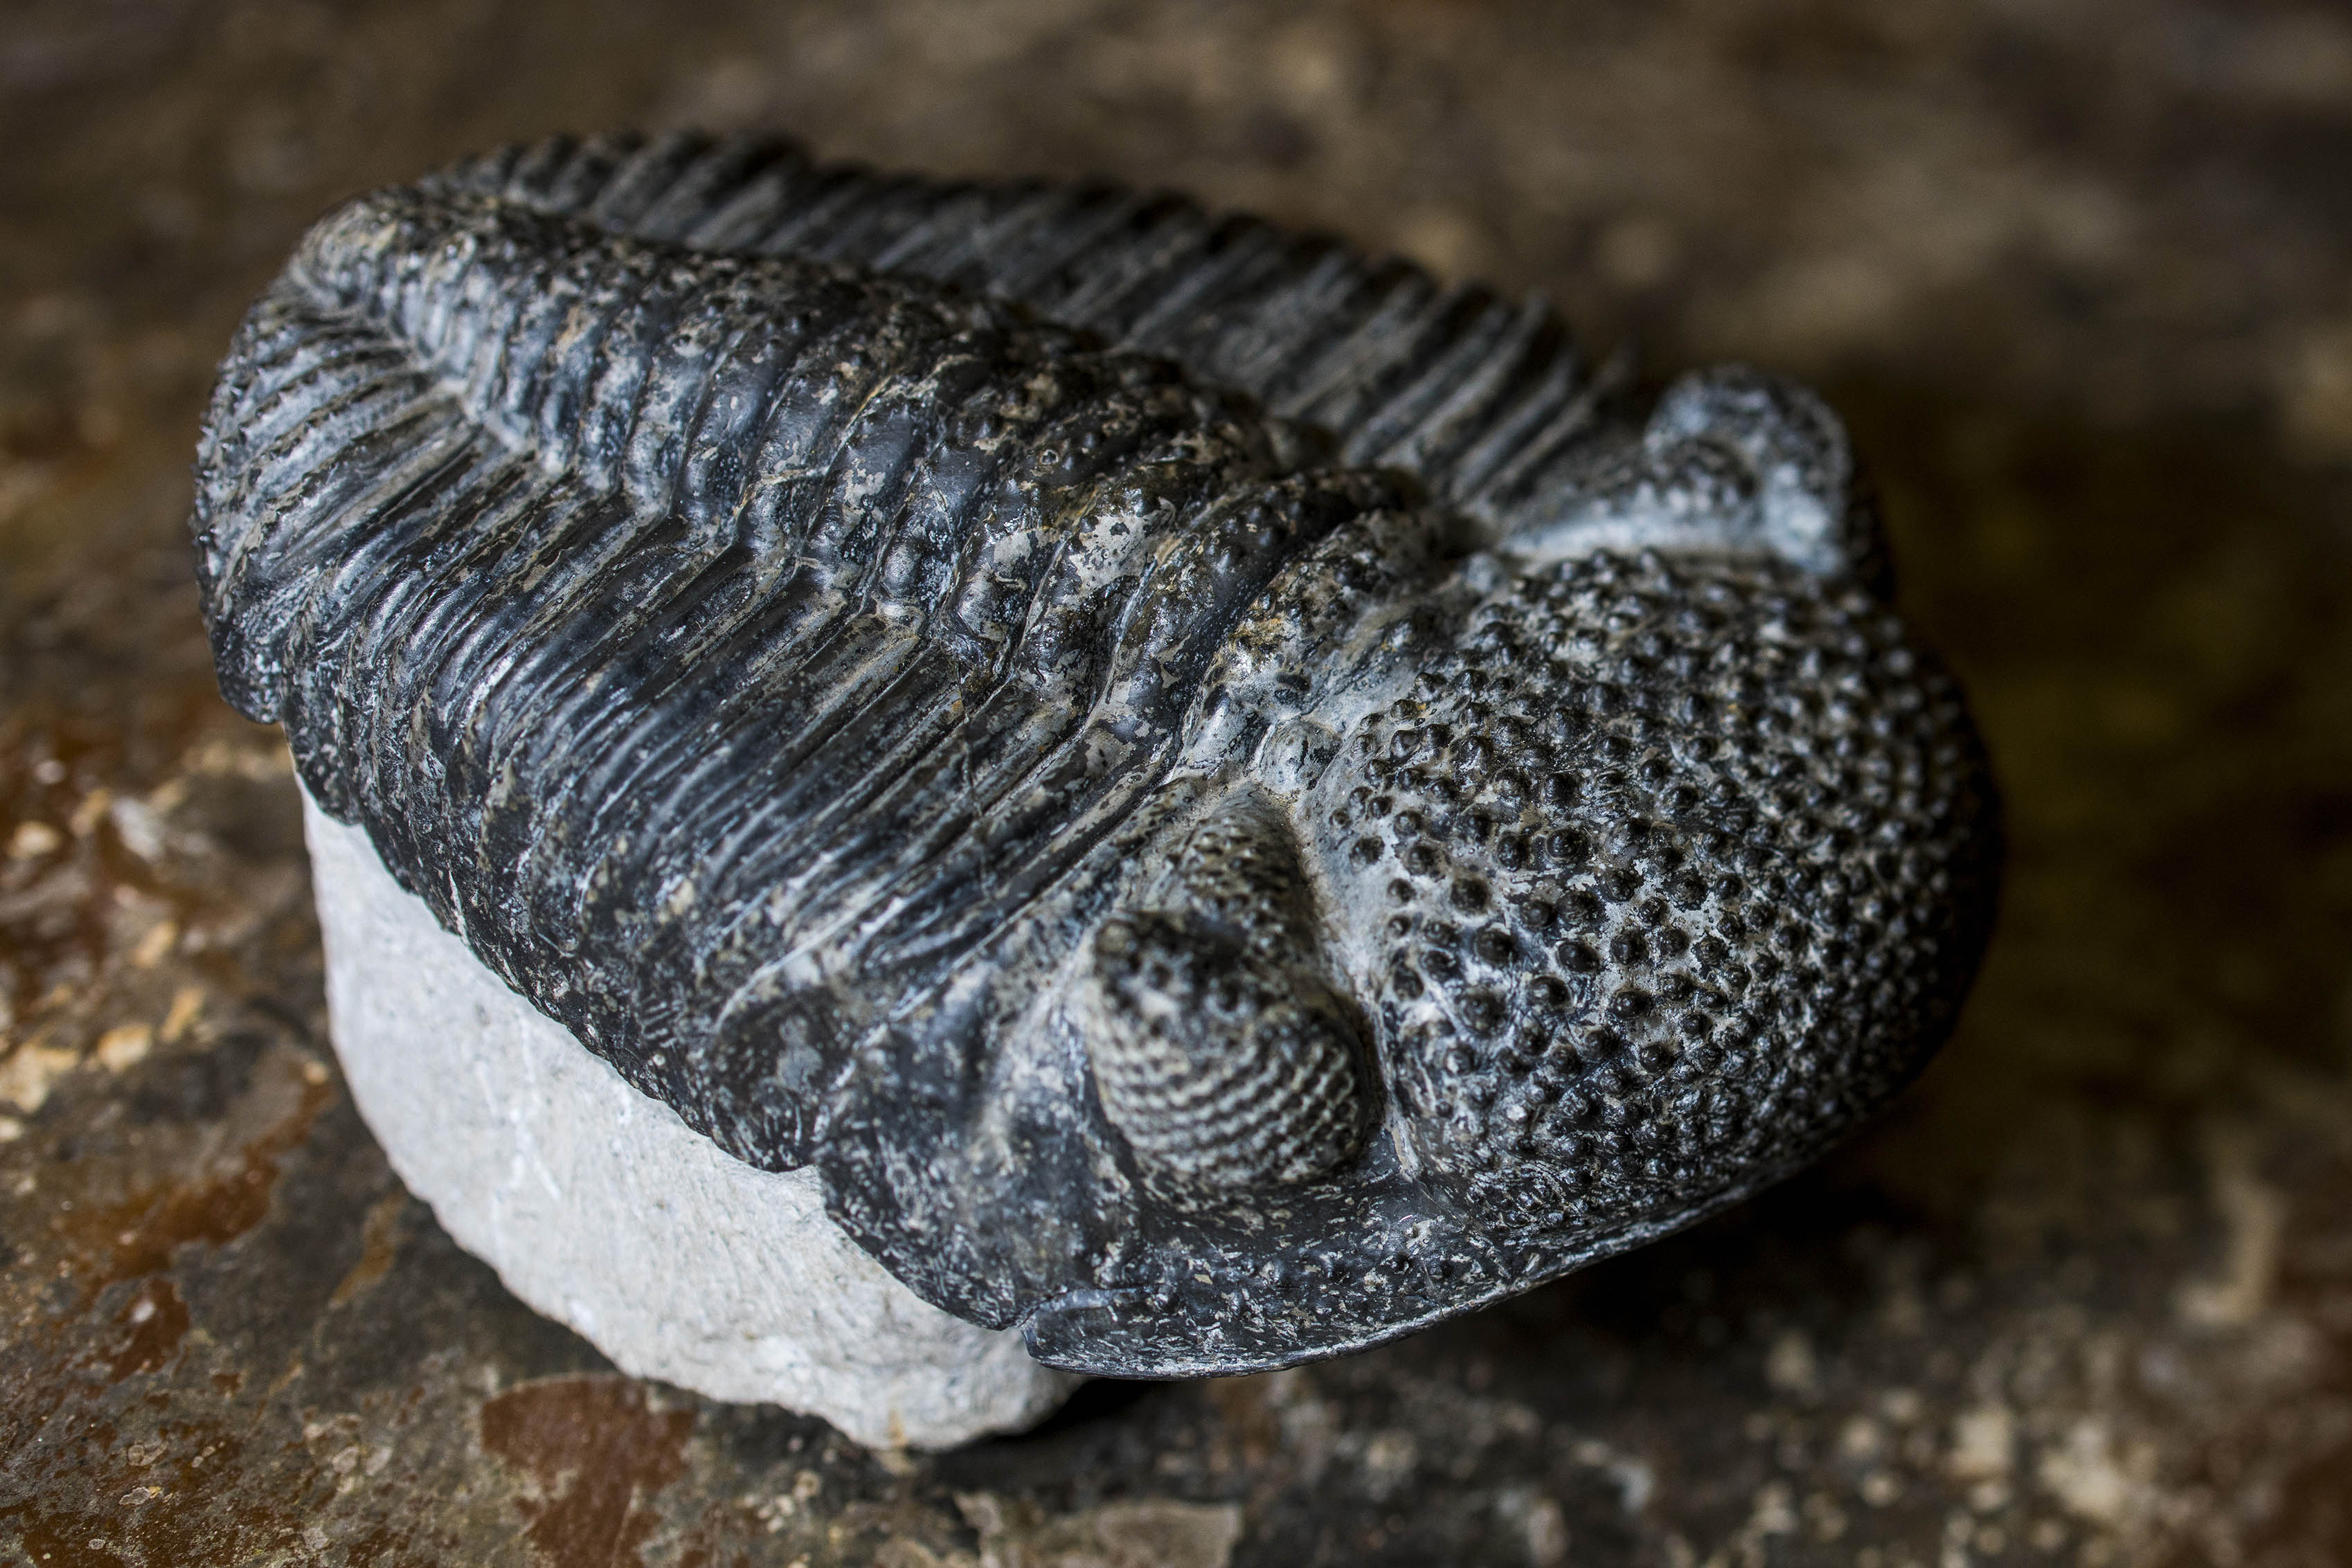 A black ridged trilobite fossil with a raised center spine and rounded head with several small raised rounded nodules.